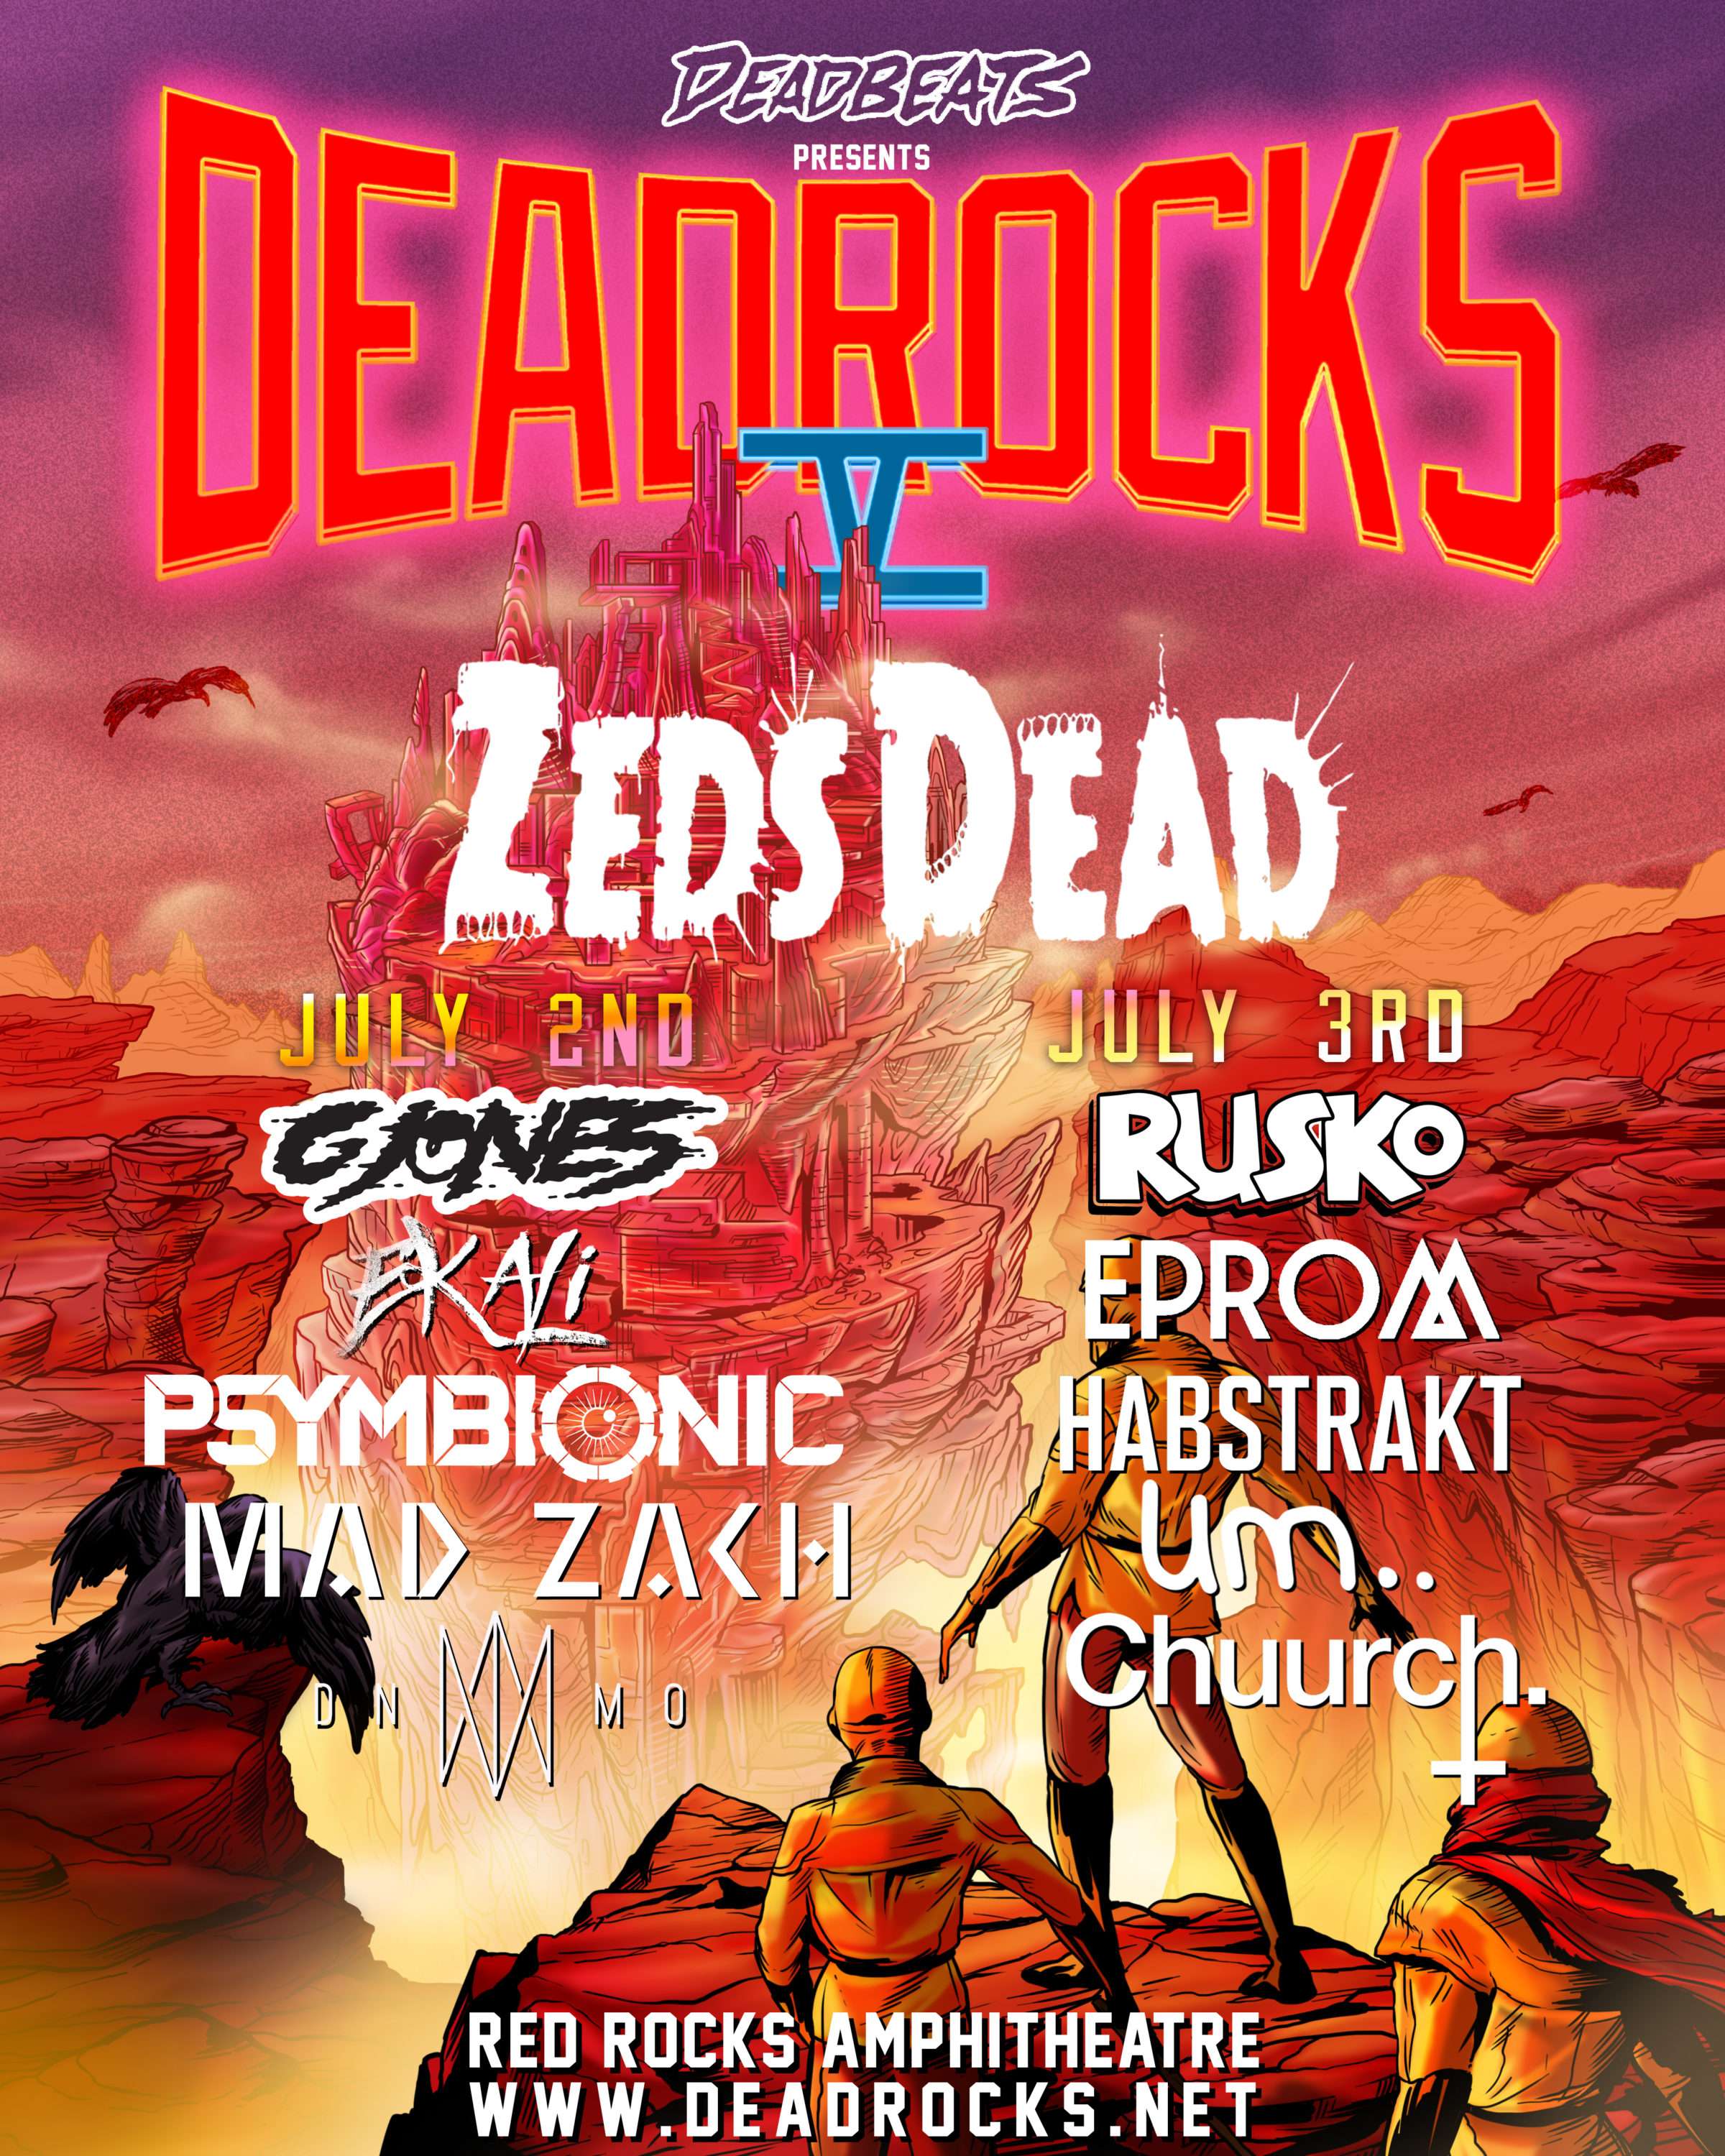 Zeds Dead Reveals Complete Deadrocks Lineup With Two Days Of Insane